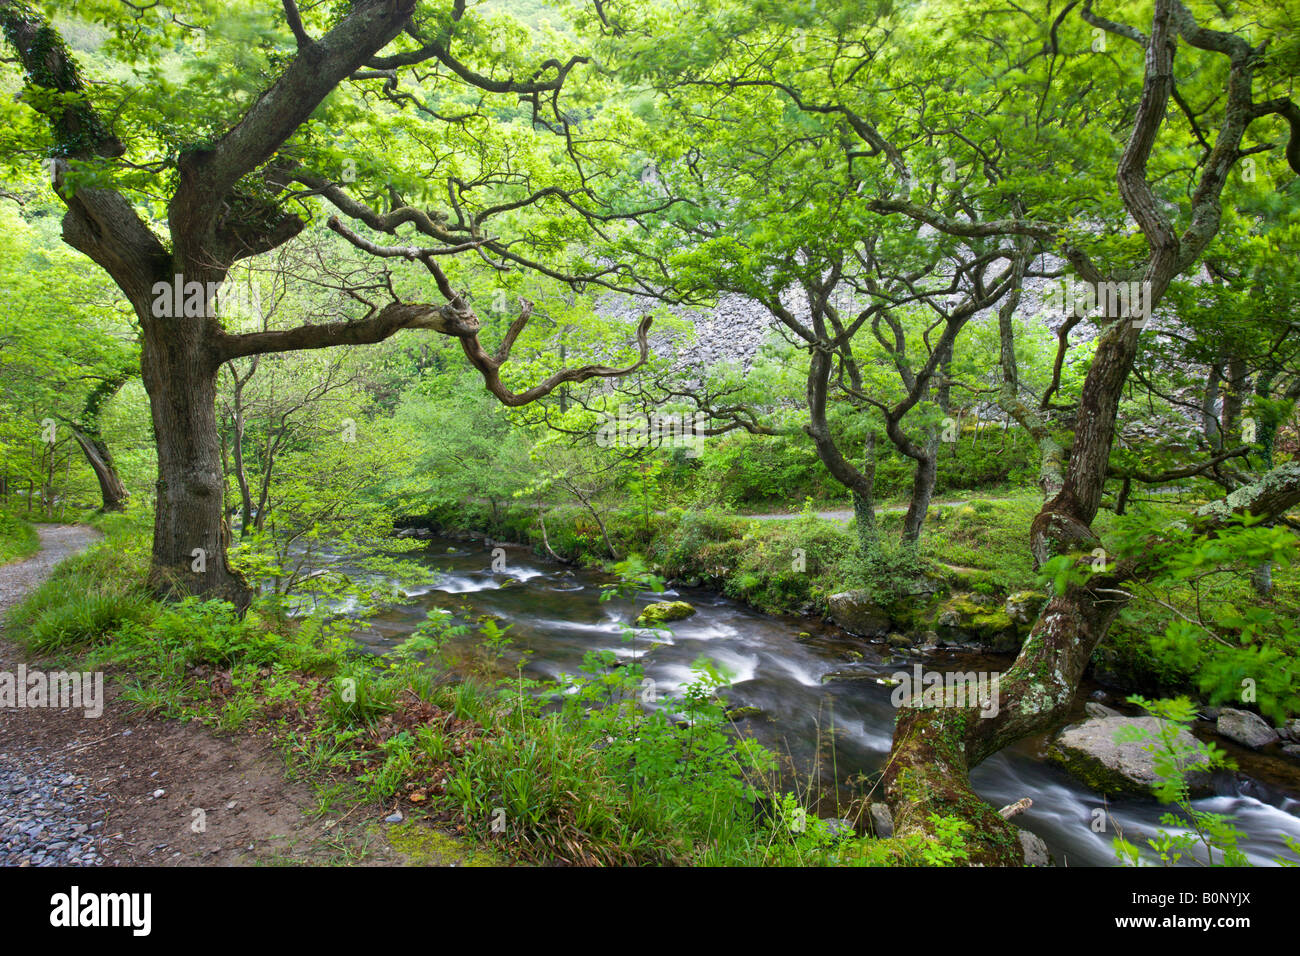 Spring foliage on the Sessile Oaks overlooking the East Lyn River at Watersmeet in Exmoor National Park Devon England Stock Photo